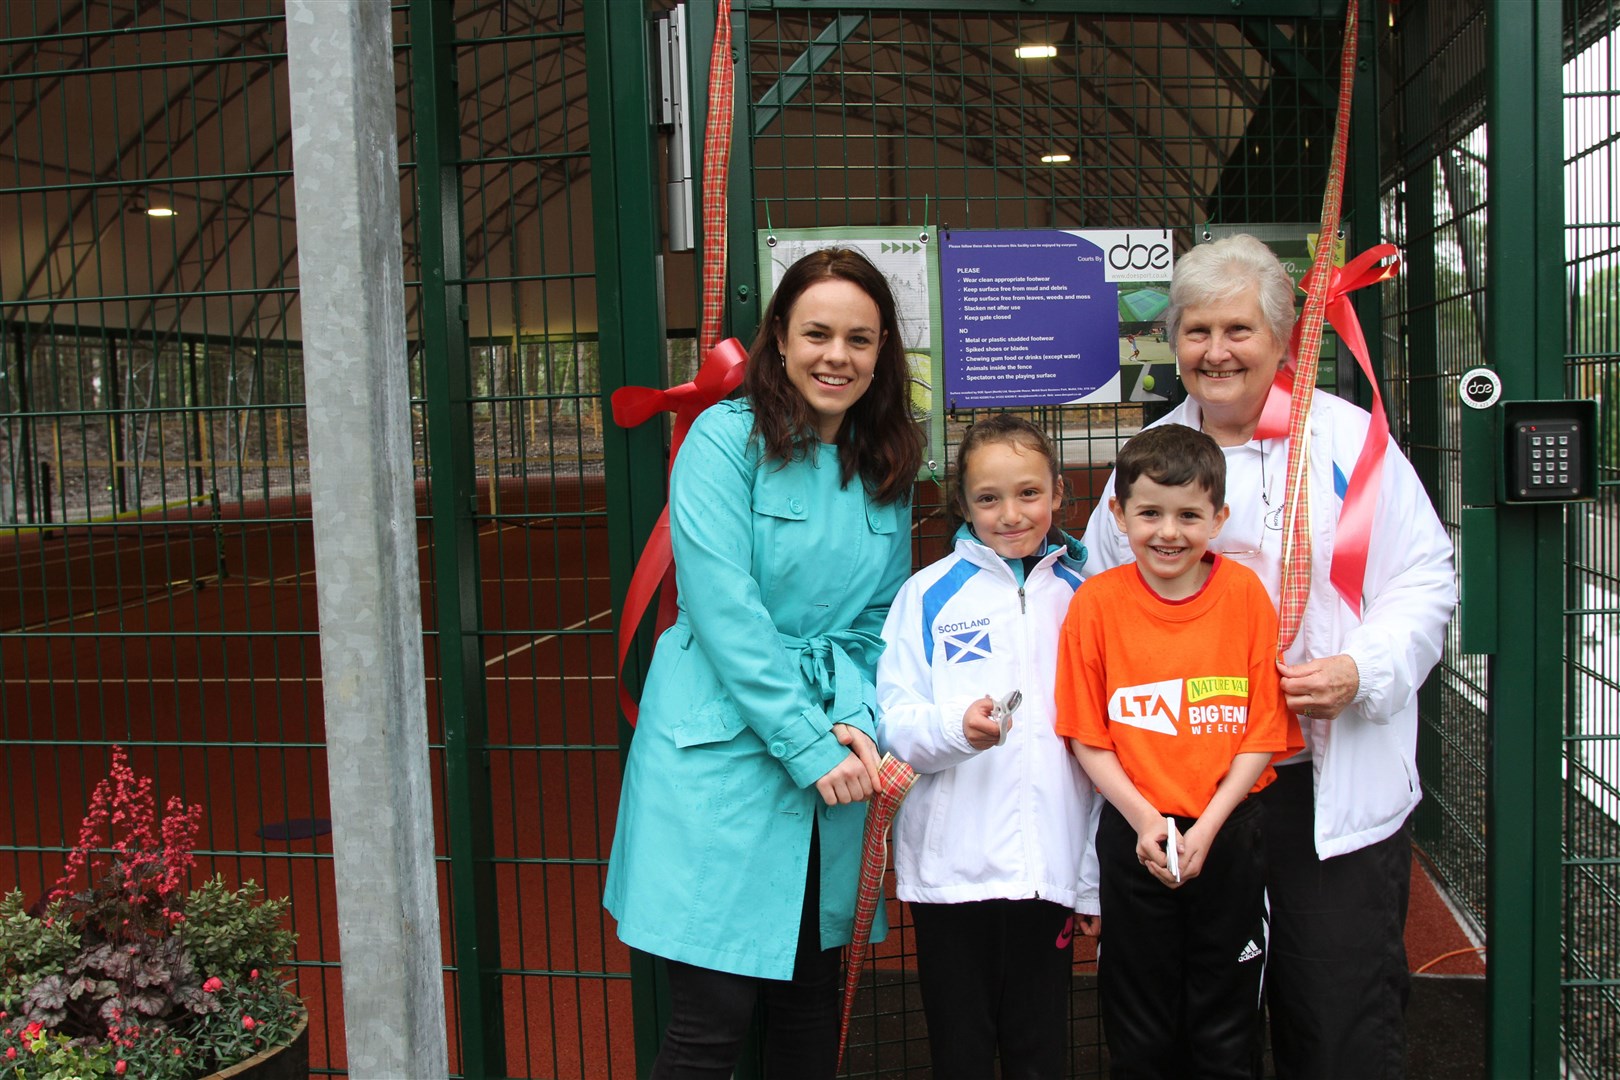 Kate Forbes MSP, Lexi Farquhar, Callum Mackay and Yvonne Birnie perform the honours at the official opening.